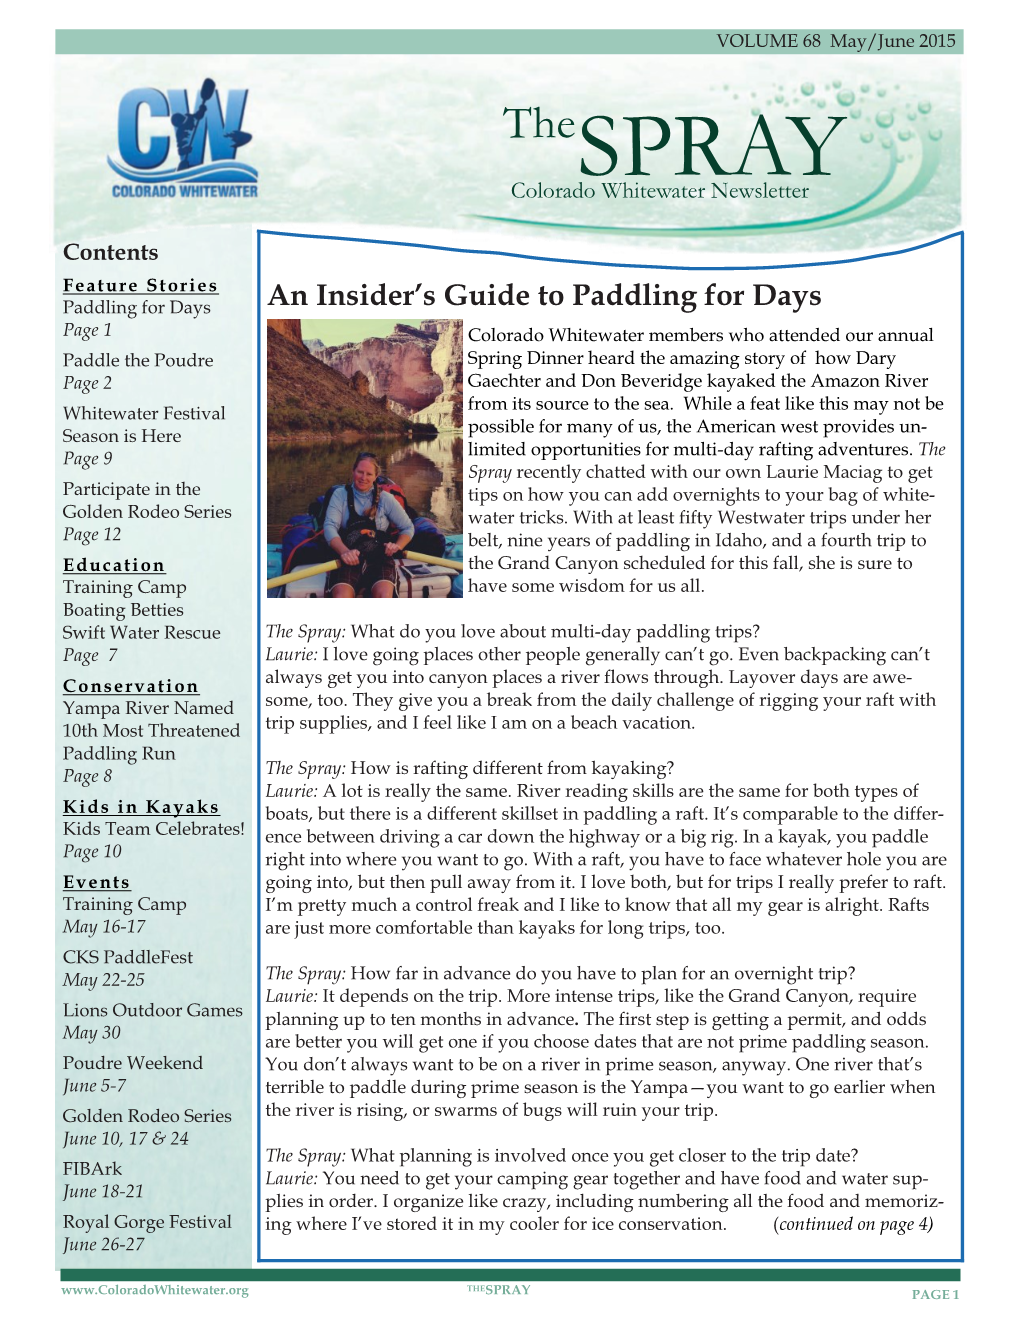 The SPRAY Colorado Whitewater Newsletter